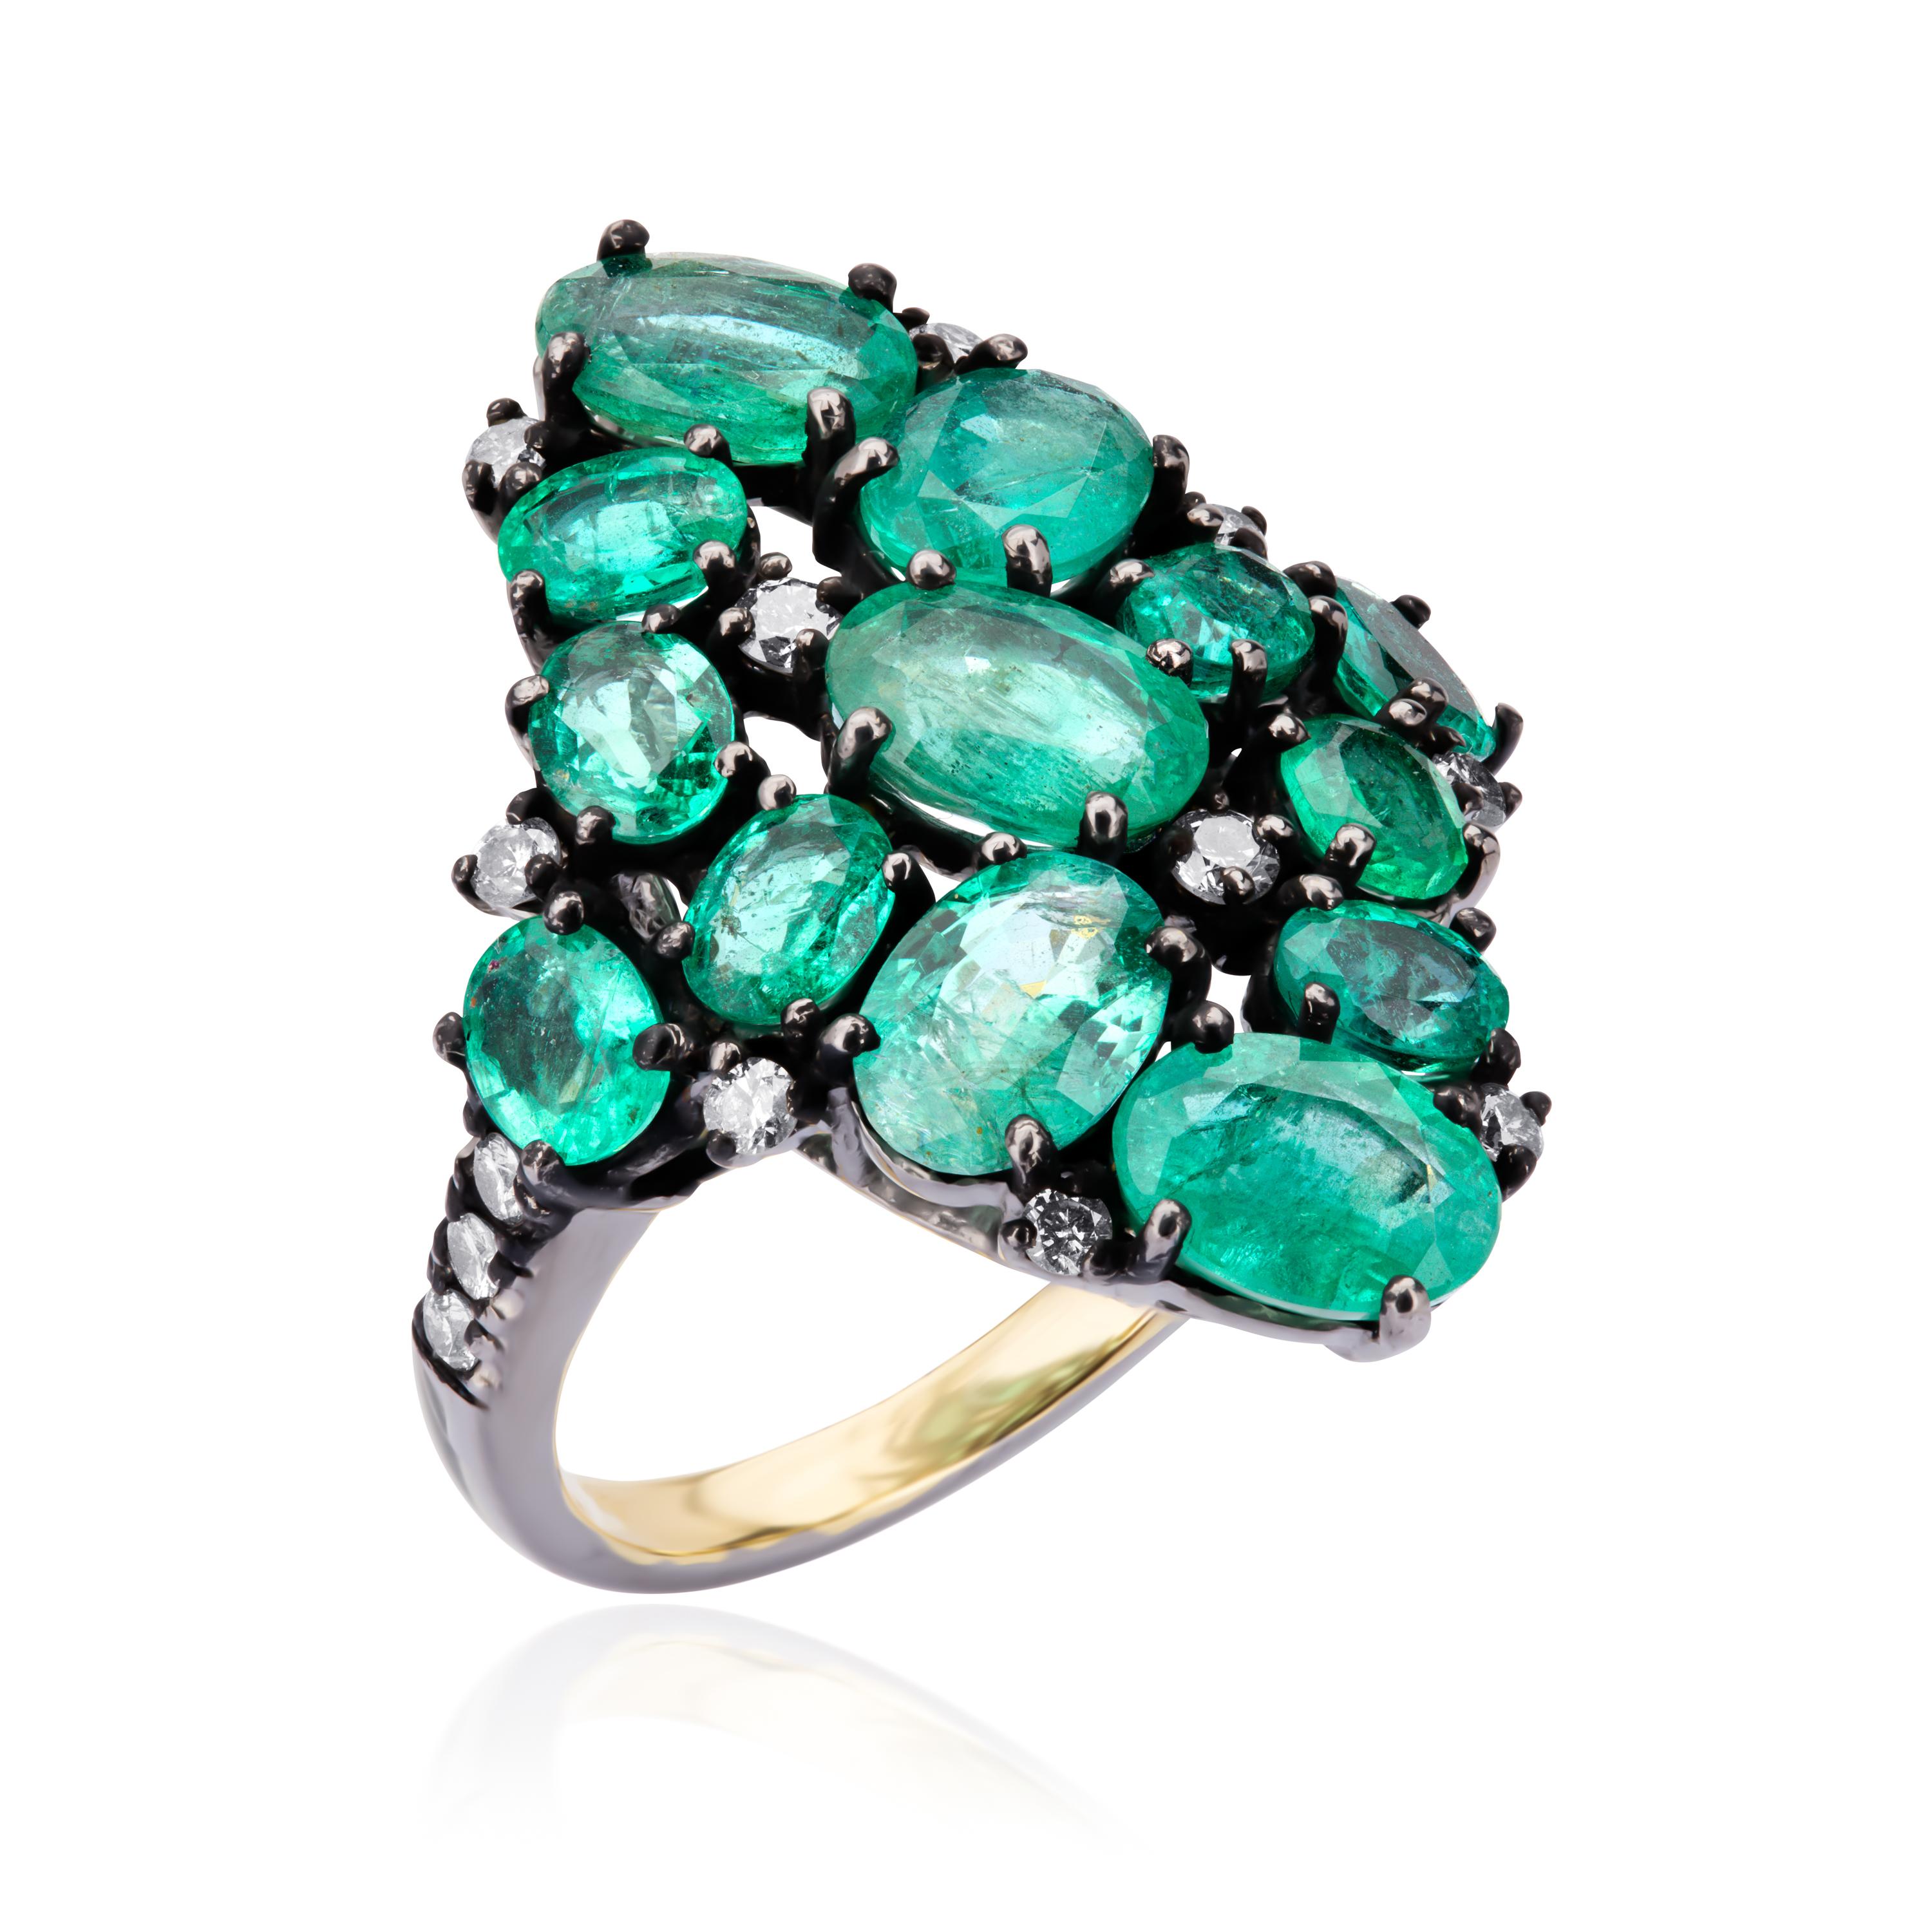 Introducing our exquisite Victorian-style ring, a true masterpiece that exudes timeless elegance and sophistication. At the heart of this stunning ring, you'll find a collection of vibrant and lively electric green rose cut emeralds, totaling an